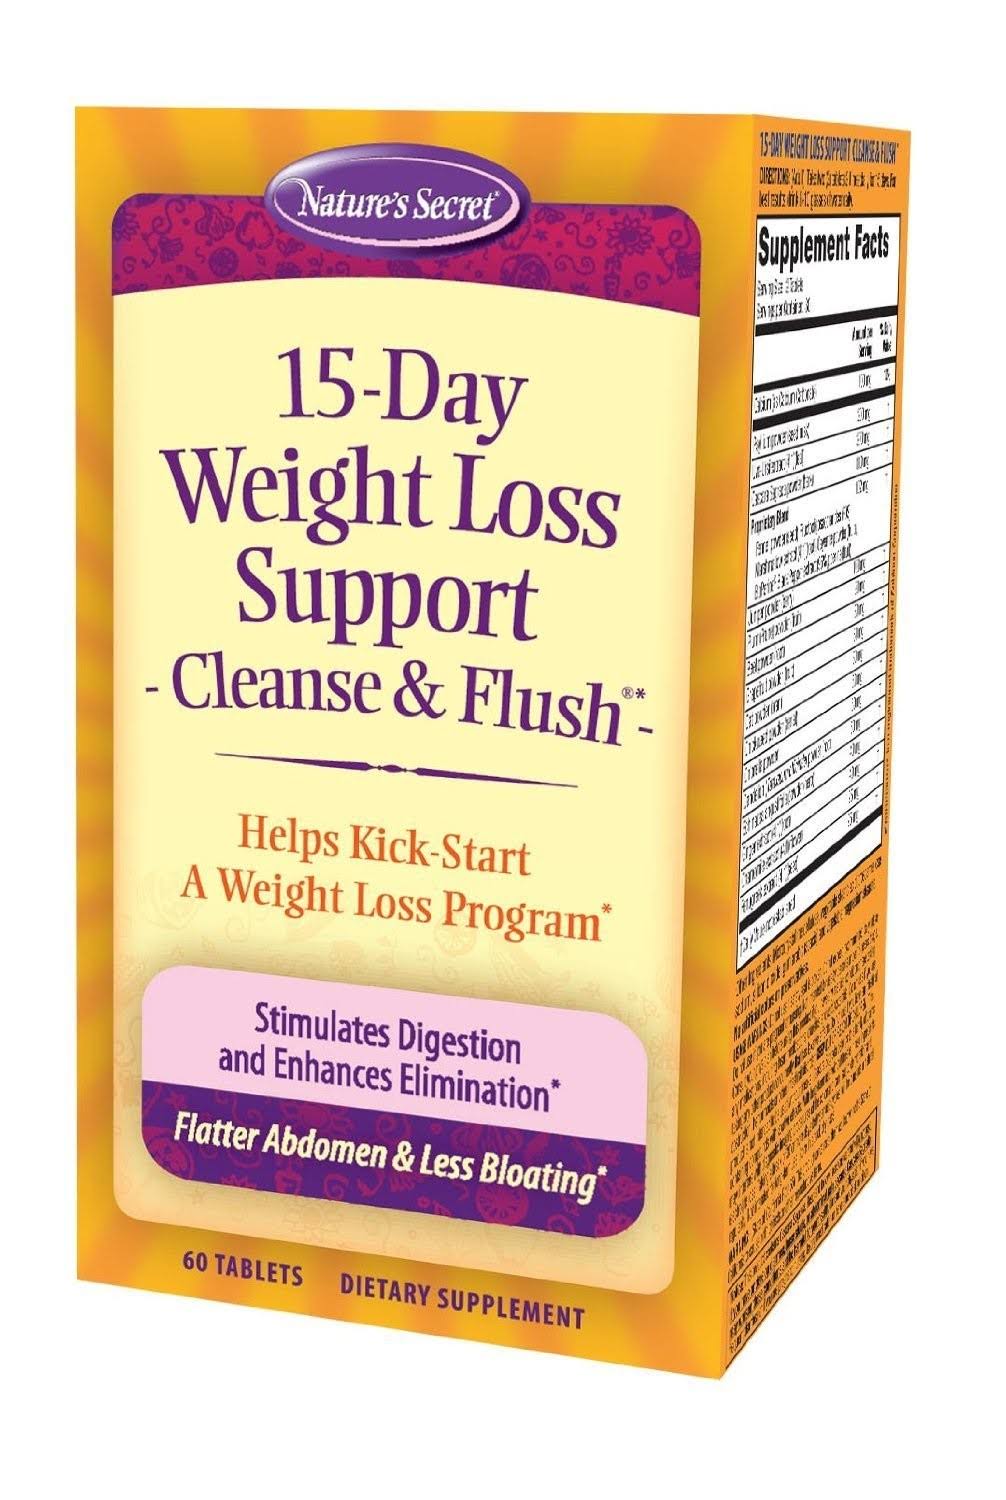 Nature's Secret 15 Day Weight Loss Cleanse & Flush - 60 Tablets